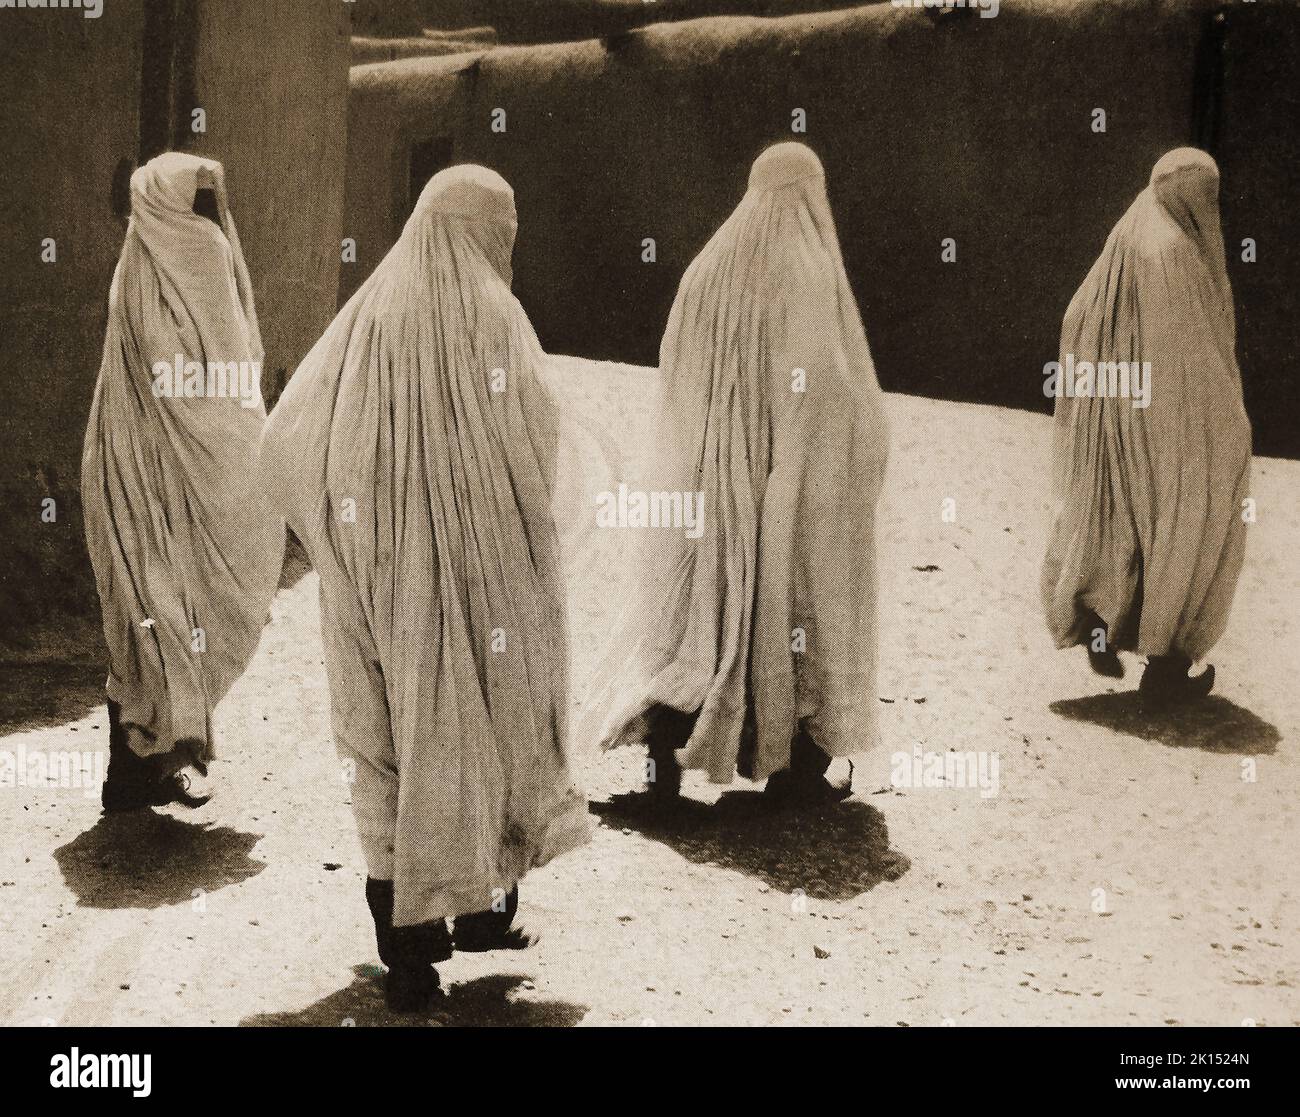 1940's Indian women in full Purdahs- Purdah meaning curtain or  veil  (from Hindi-Urdu پردہ, पर्दा ) The religious and social practice ensures female seclusion  or the covering of bodies in some Muslim and Hindu communities. A woman who practices purdah is usually  referred to as pardanashin or purdahnishan.   --- 1940 के दशक में पूर्ण पर्दा में भारतीय महिलाएं- पर्दा का अर्थ है पर्दा या घूंघट   ----1940 کی ہندوستانی خواتین مکمل پردہ میں- پردہ کا مطلب پردہ یا پردہ Stock Photo